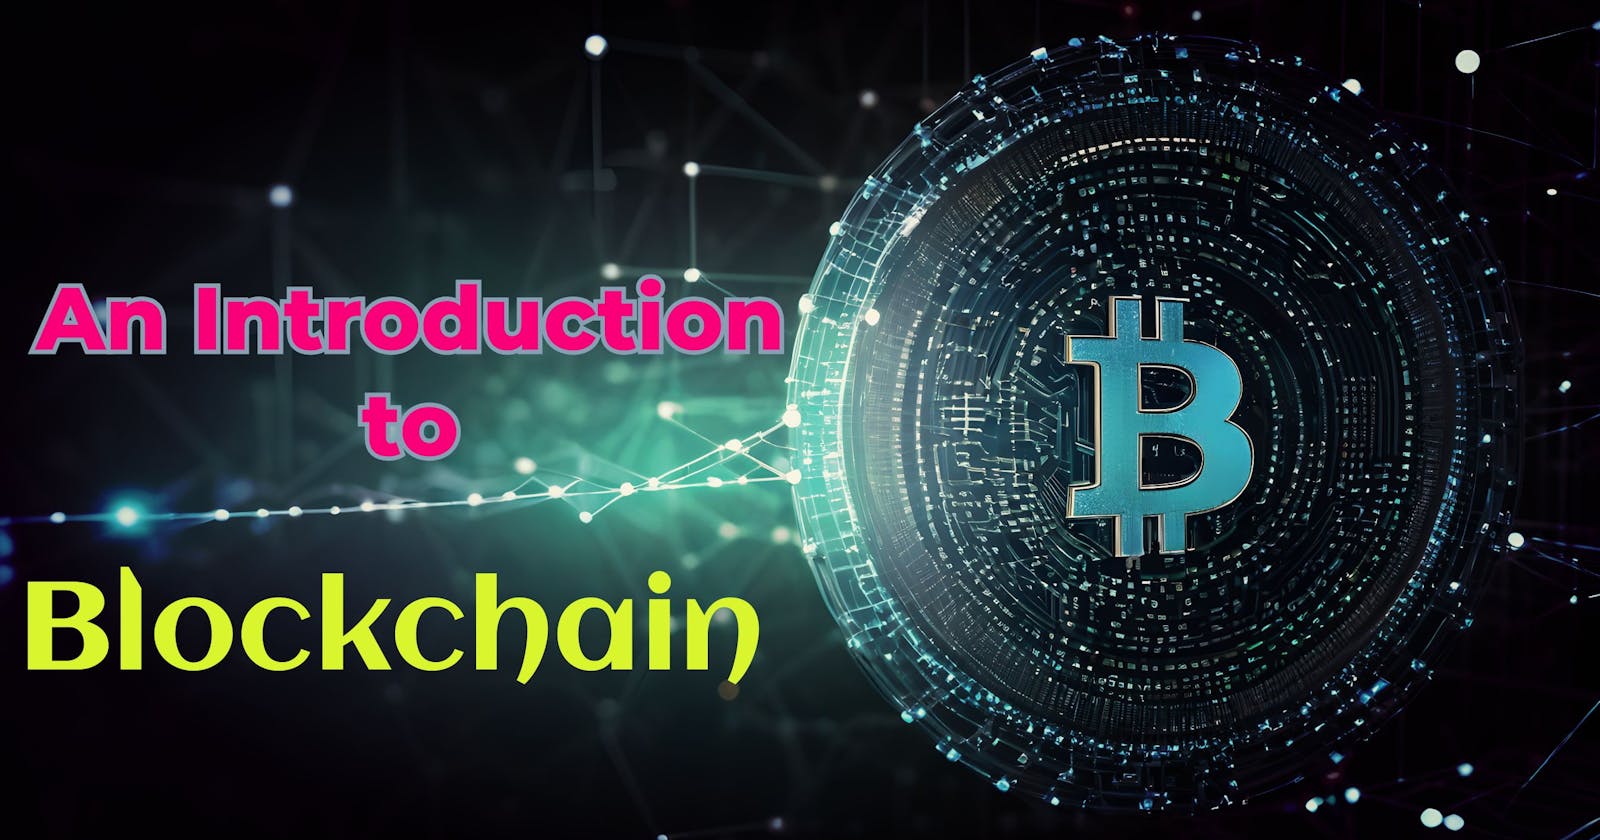 An Introduction to Blockchain